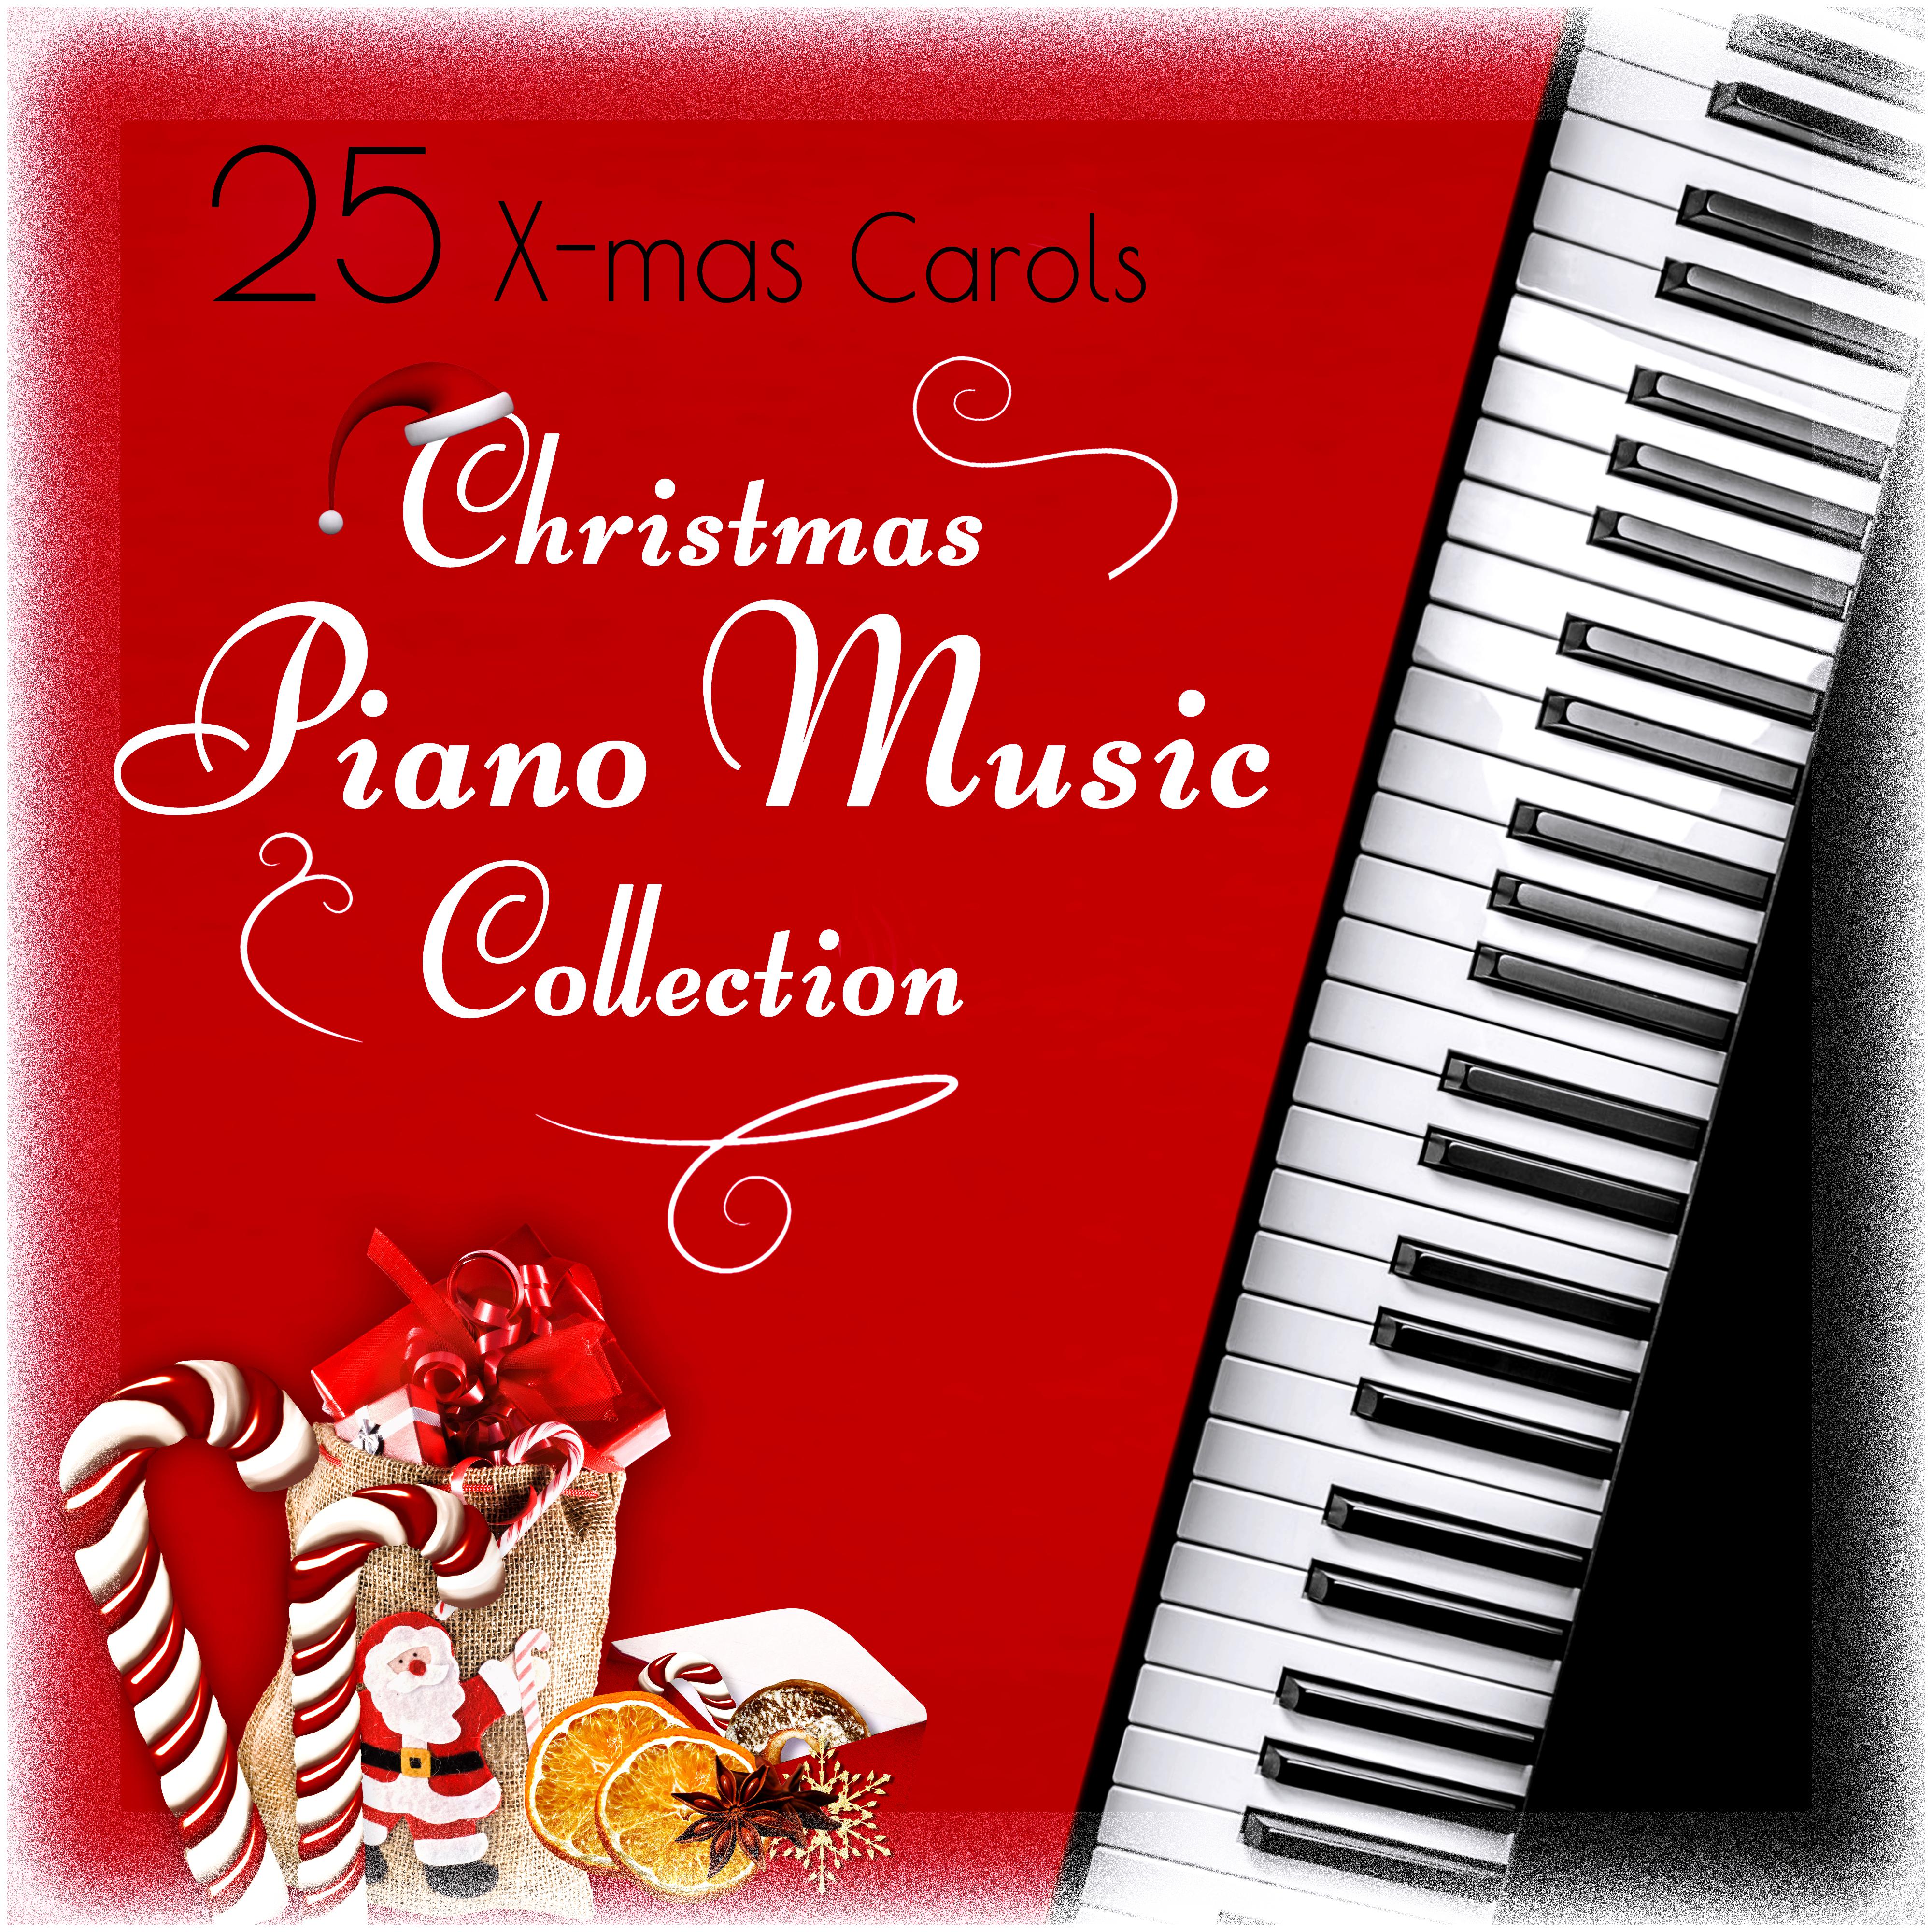 25 Xmas Carols: The Best Christmas Piano Collection – Traditional Music and Beautiful Songs for Kids and Adult, Family Christmas Time & Magic Holidays